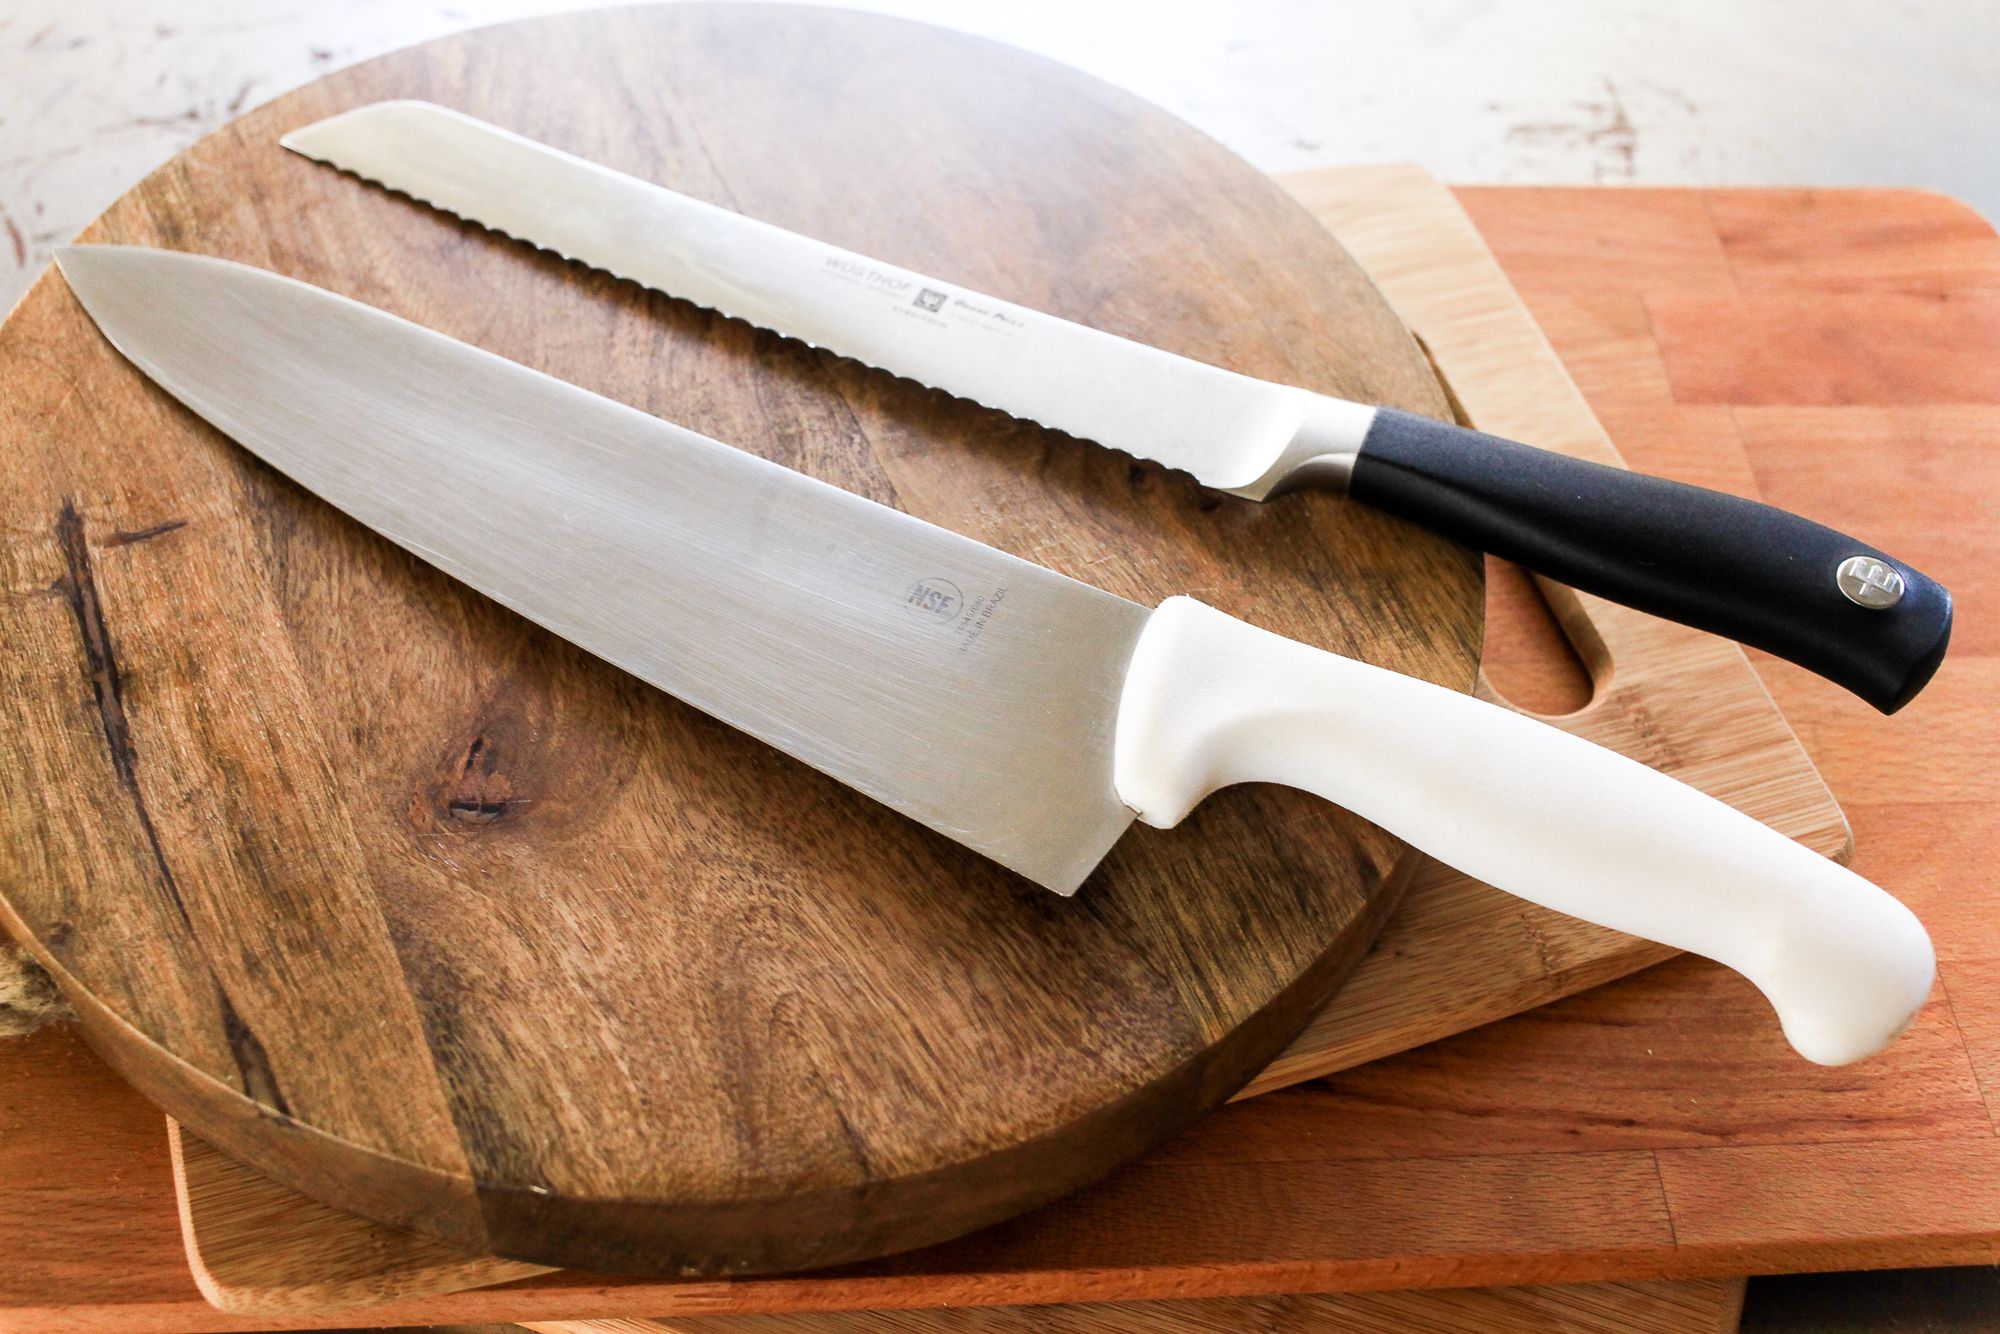 5 Classic Ways to Test Blade Sharpness - Knife Life